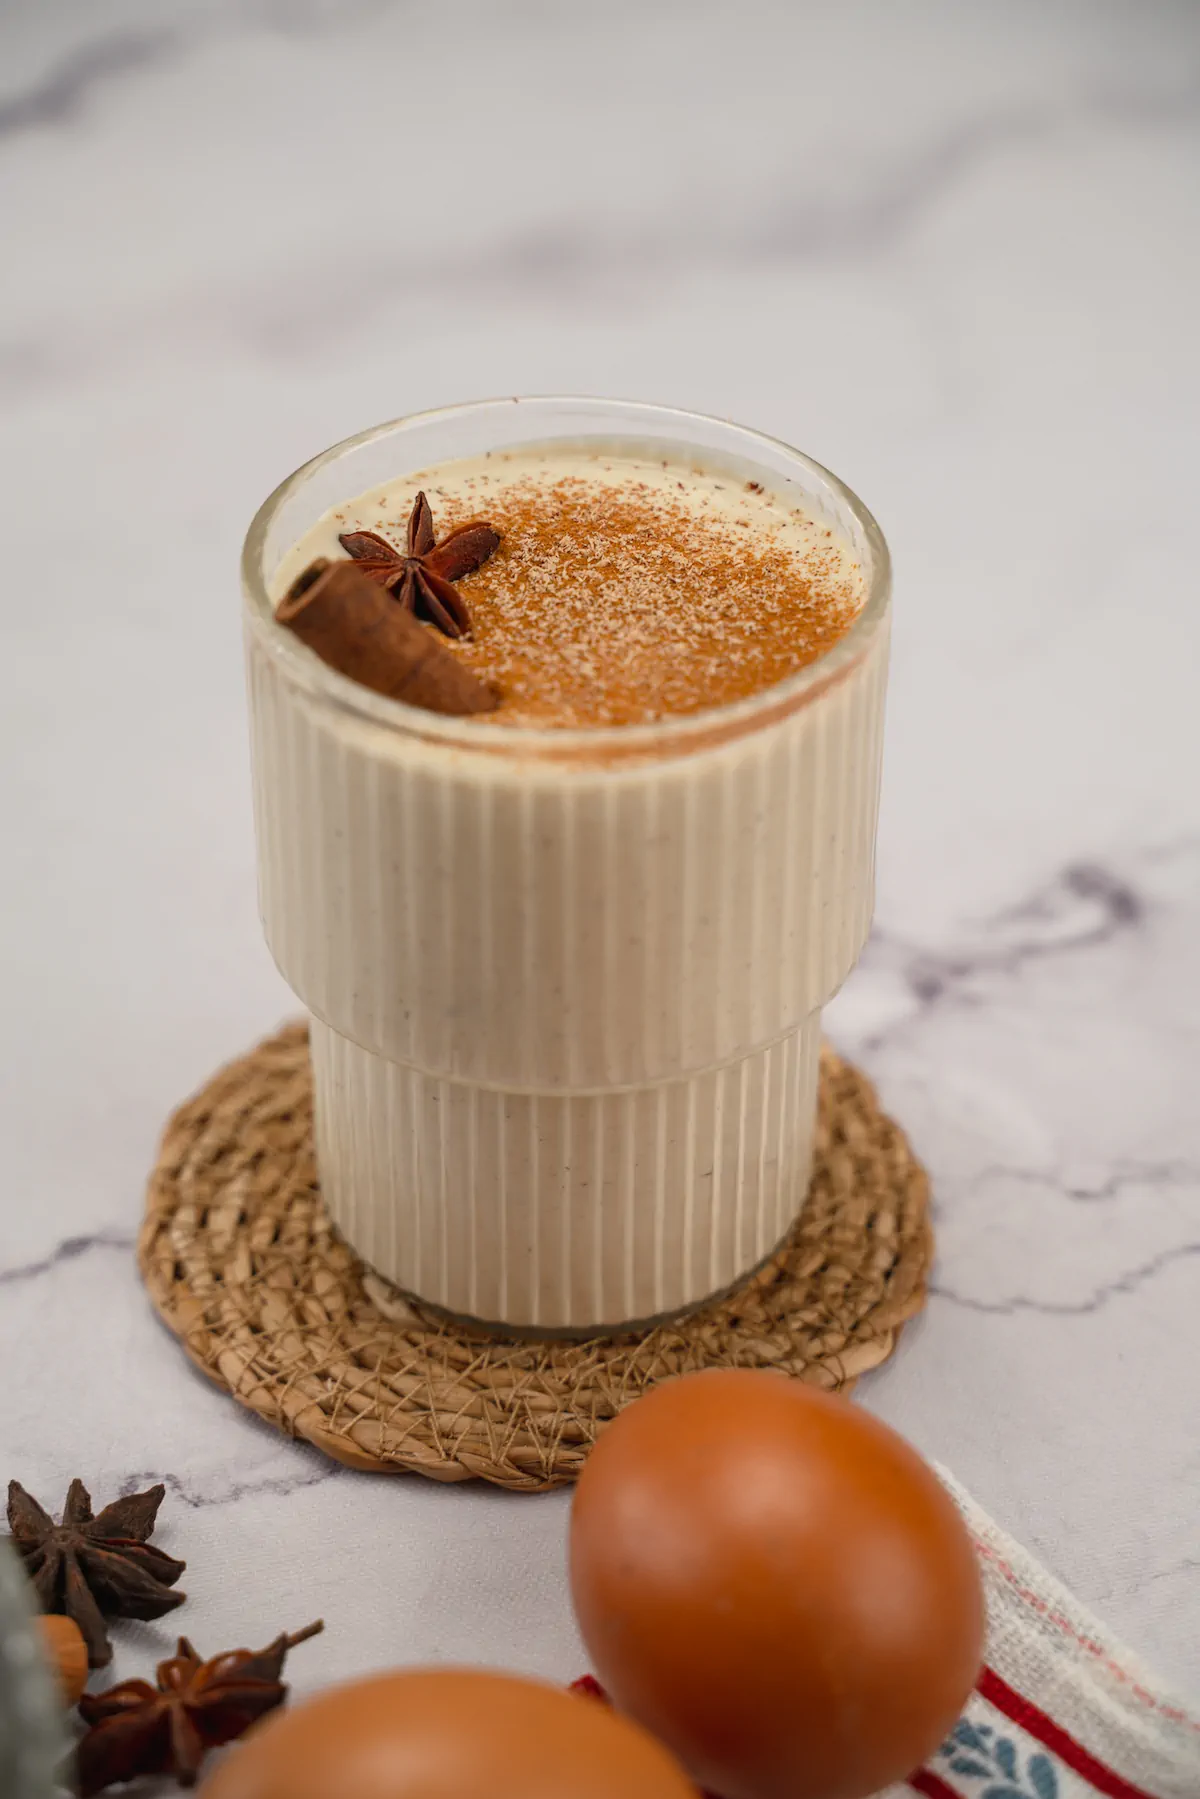 Keto eggnog served in a transparent glass, decorated with cinnamon sticks, star anise, and sprinkled with cinnamon and nutmeg powder.